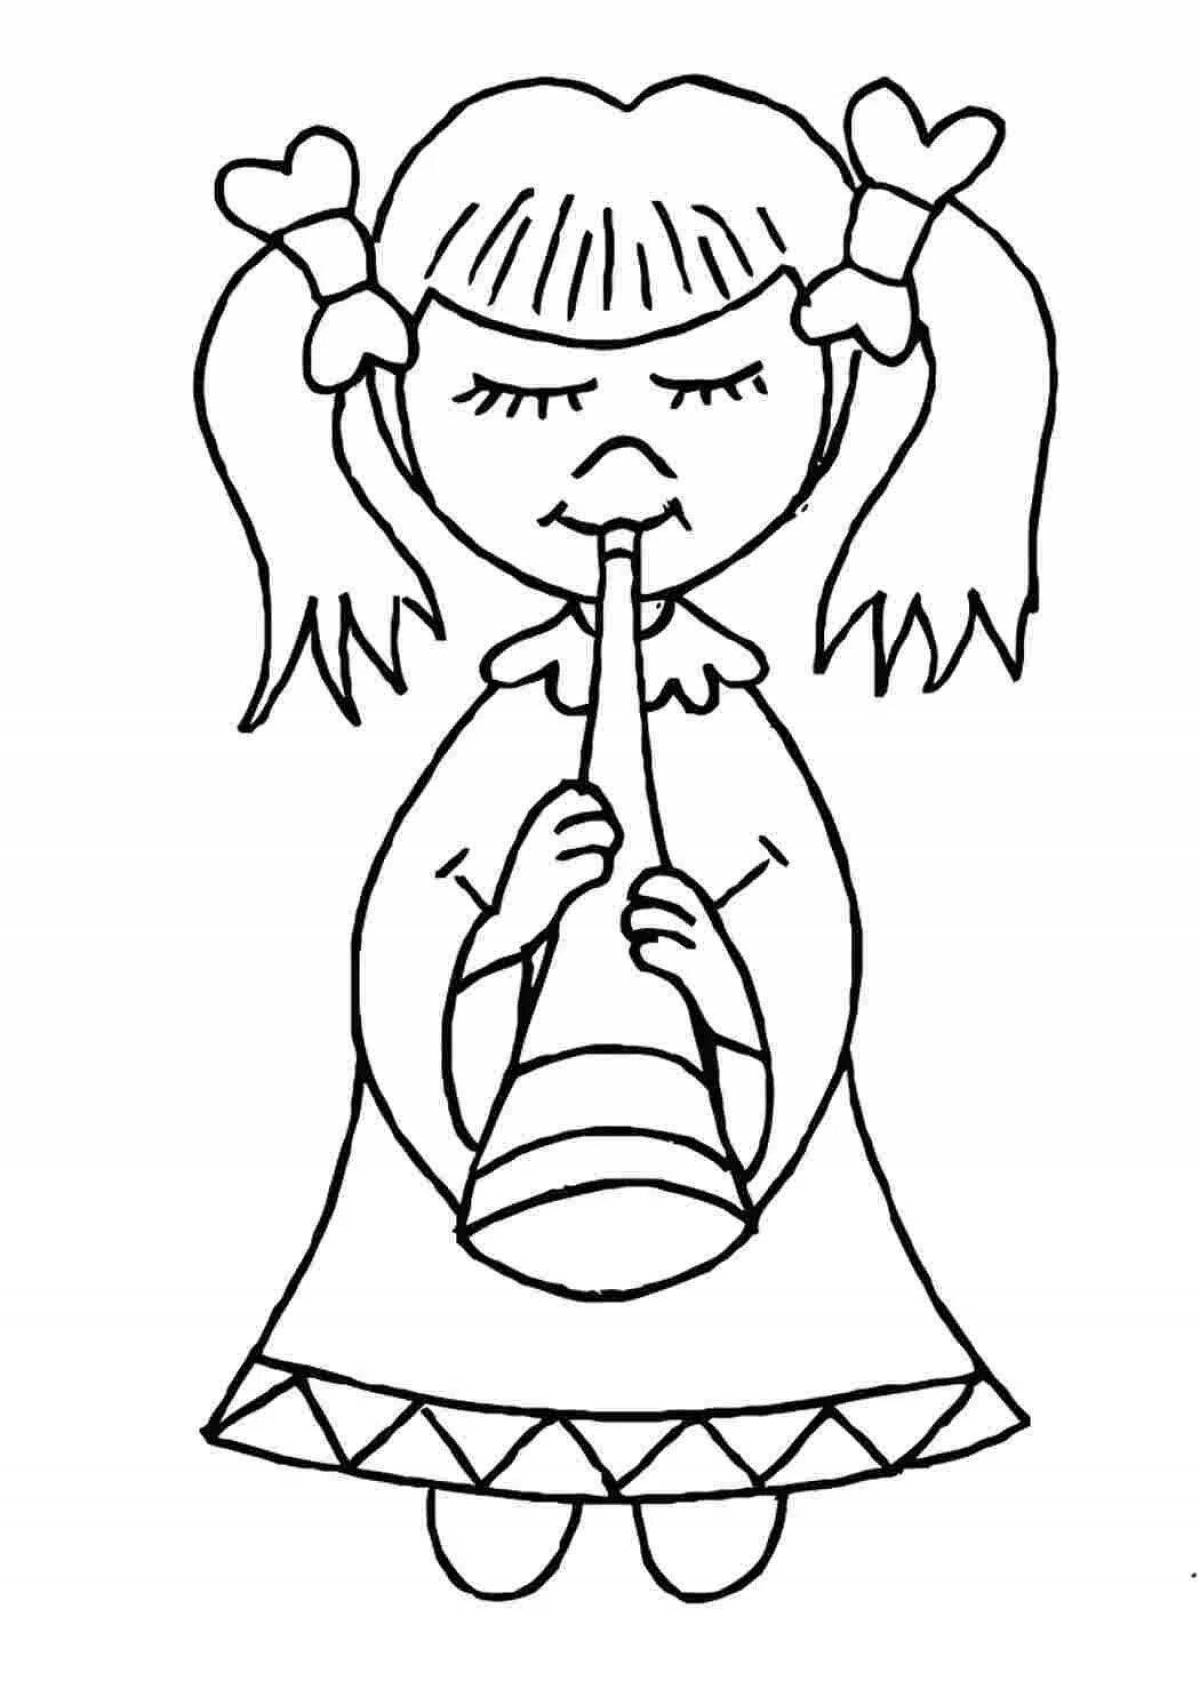 Coloring page with pipe and jug